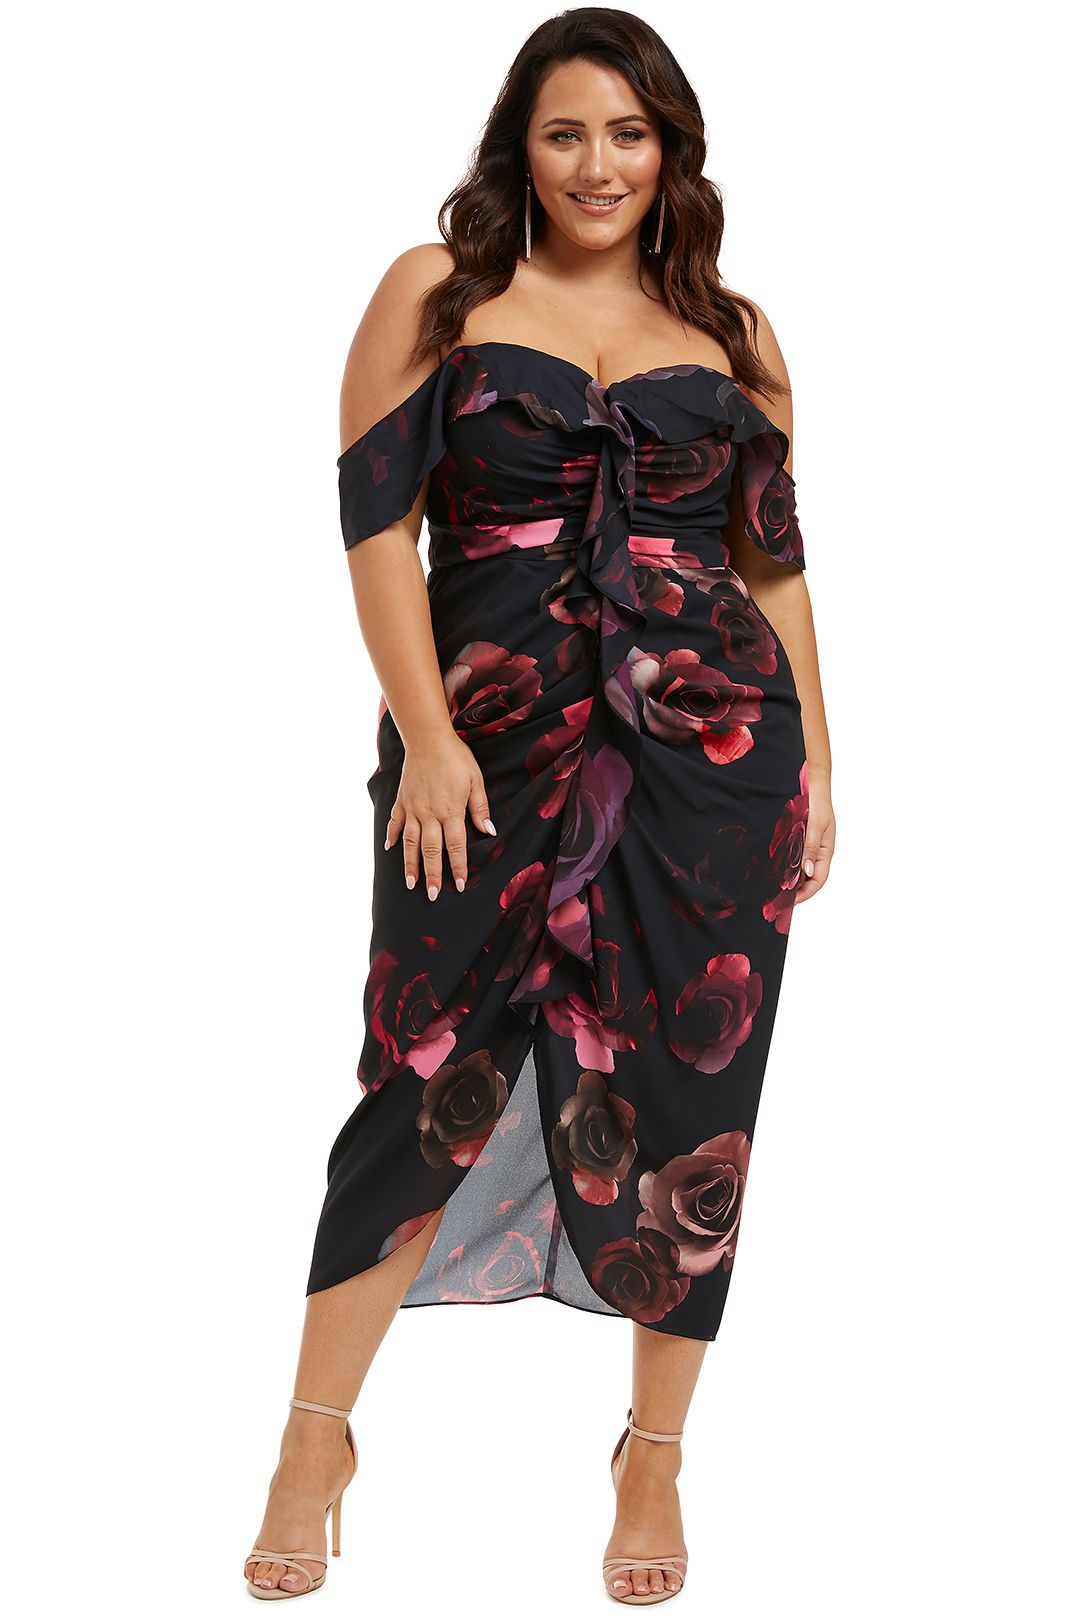 City-Chic-Decadent-Floral-Dress-Black-Front